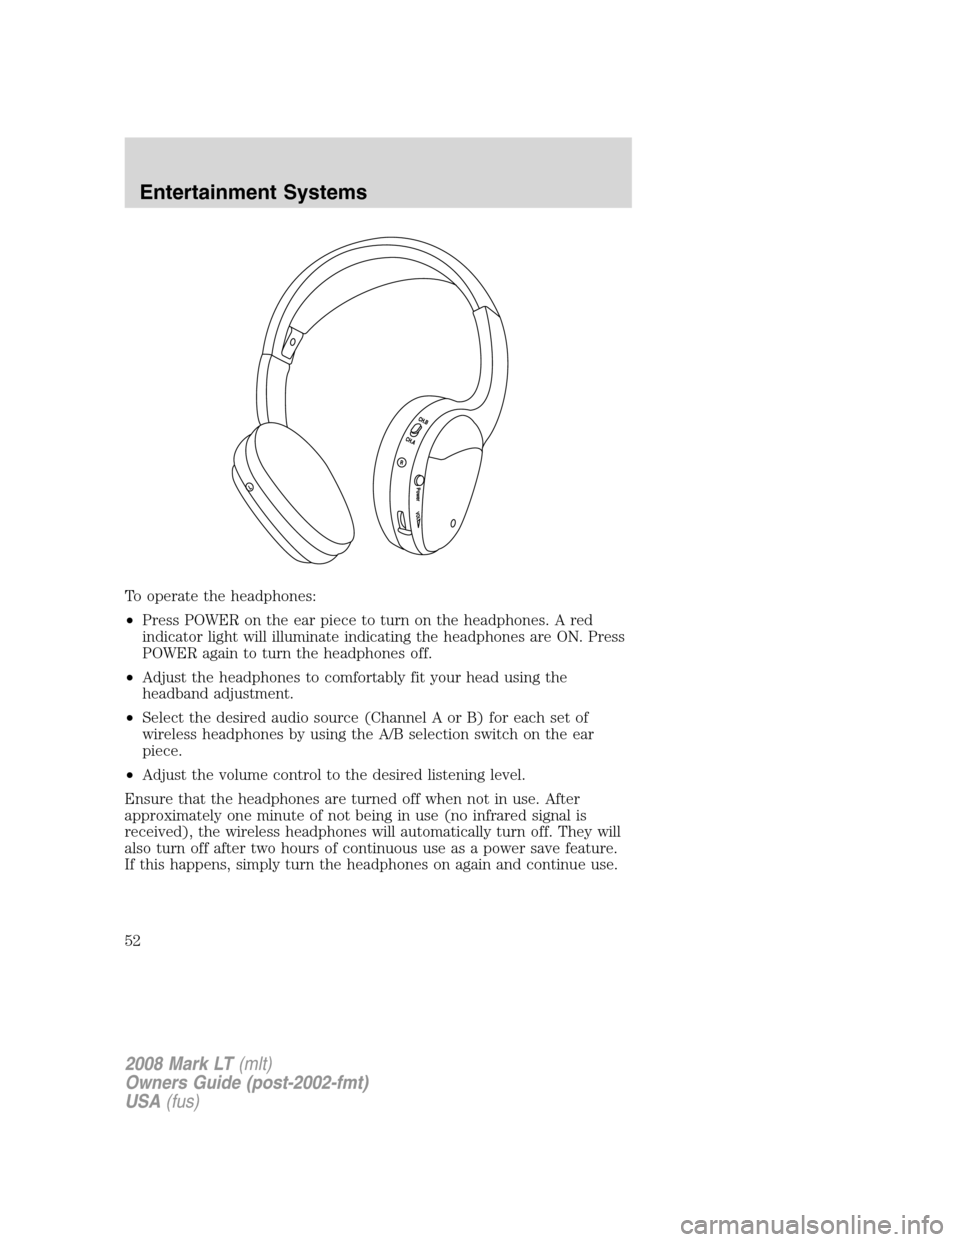 LINCOLN MARK LT 2008  Owners Manual To operate the headphones:
•Press POWER on the ear piece to turn on the headphones. A red
indicator light will illuminate indicating the headphones are ON. Press
POWER again to turn the headphones o